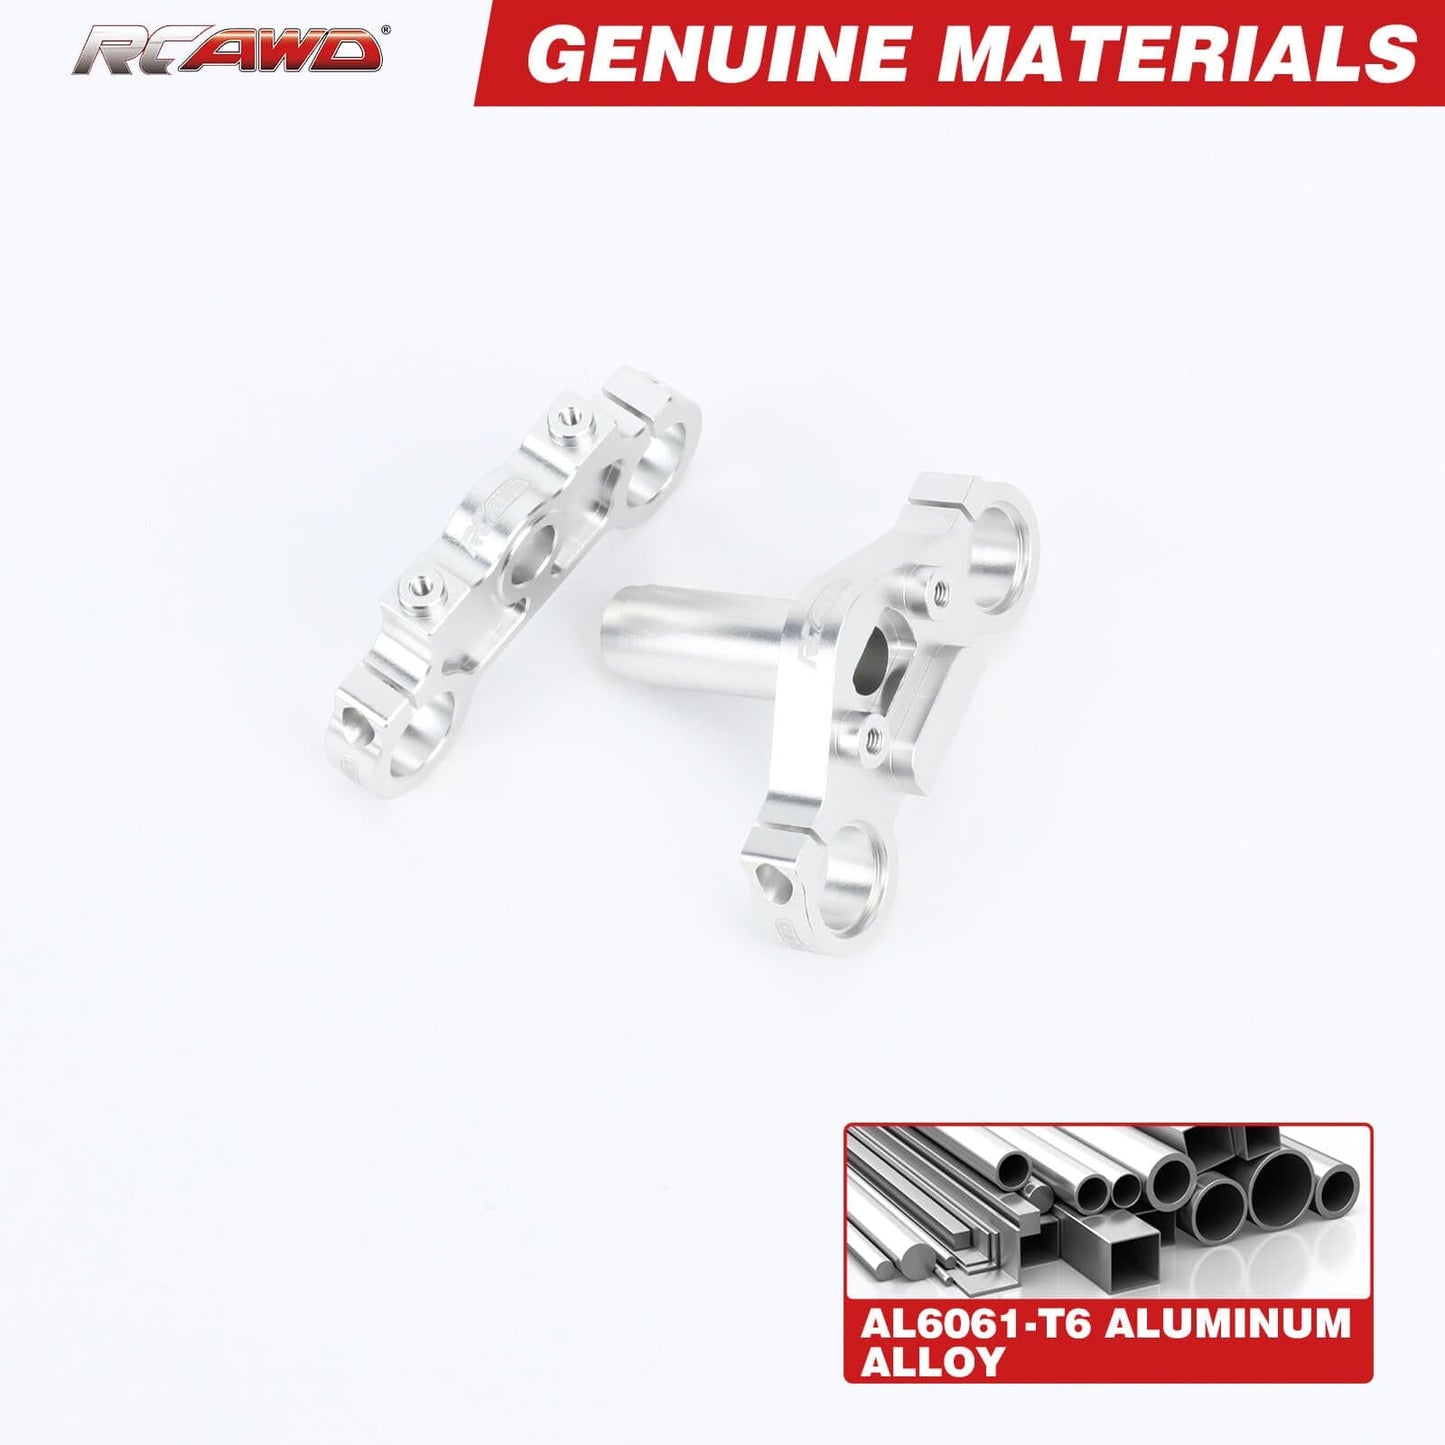 RCAWD 1/4 Losi Promoto - MX Upgrades Aluminum Triple Clamp Set for losi Motorcycle LOS364006S - RCAWD